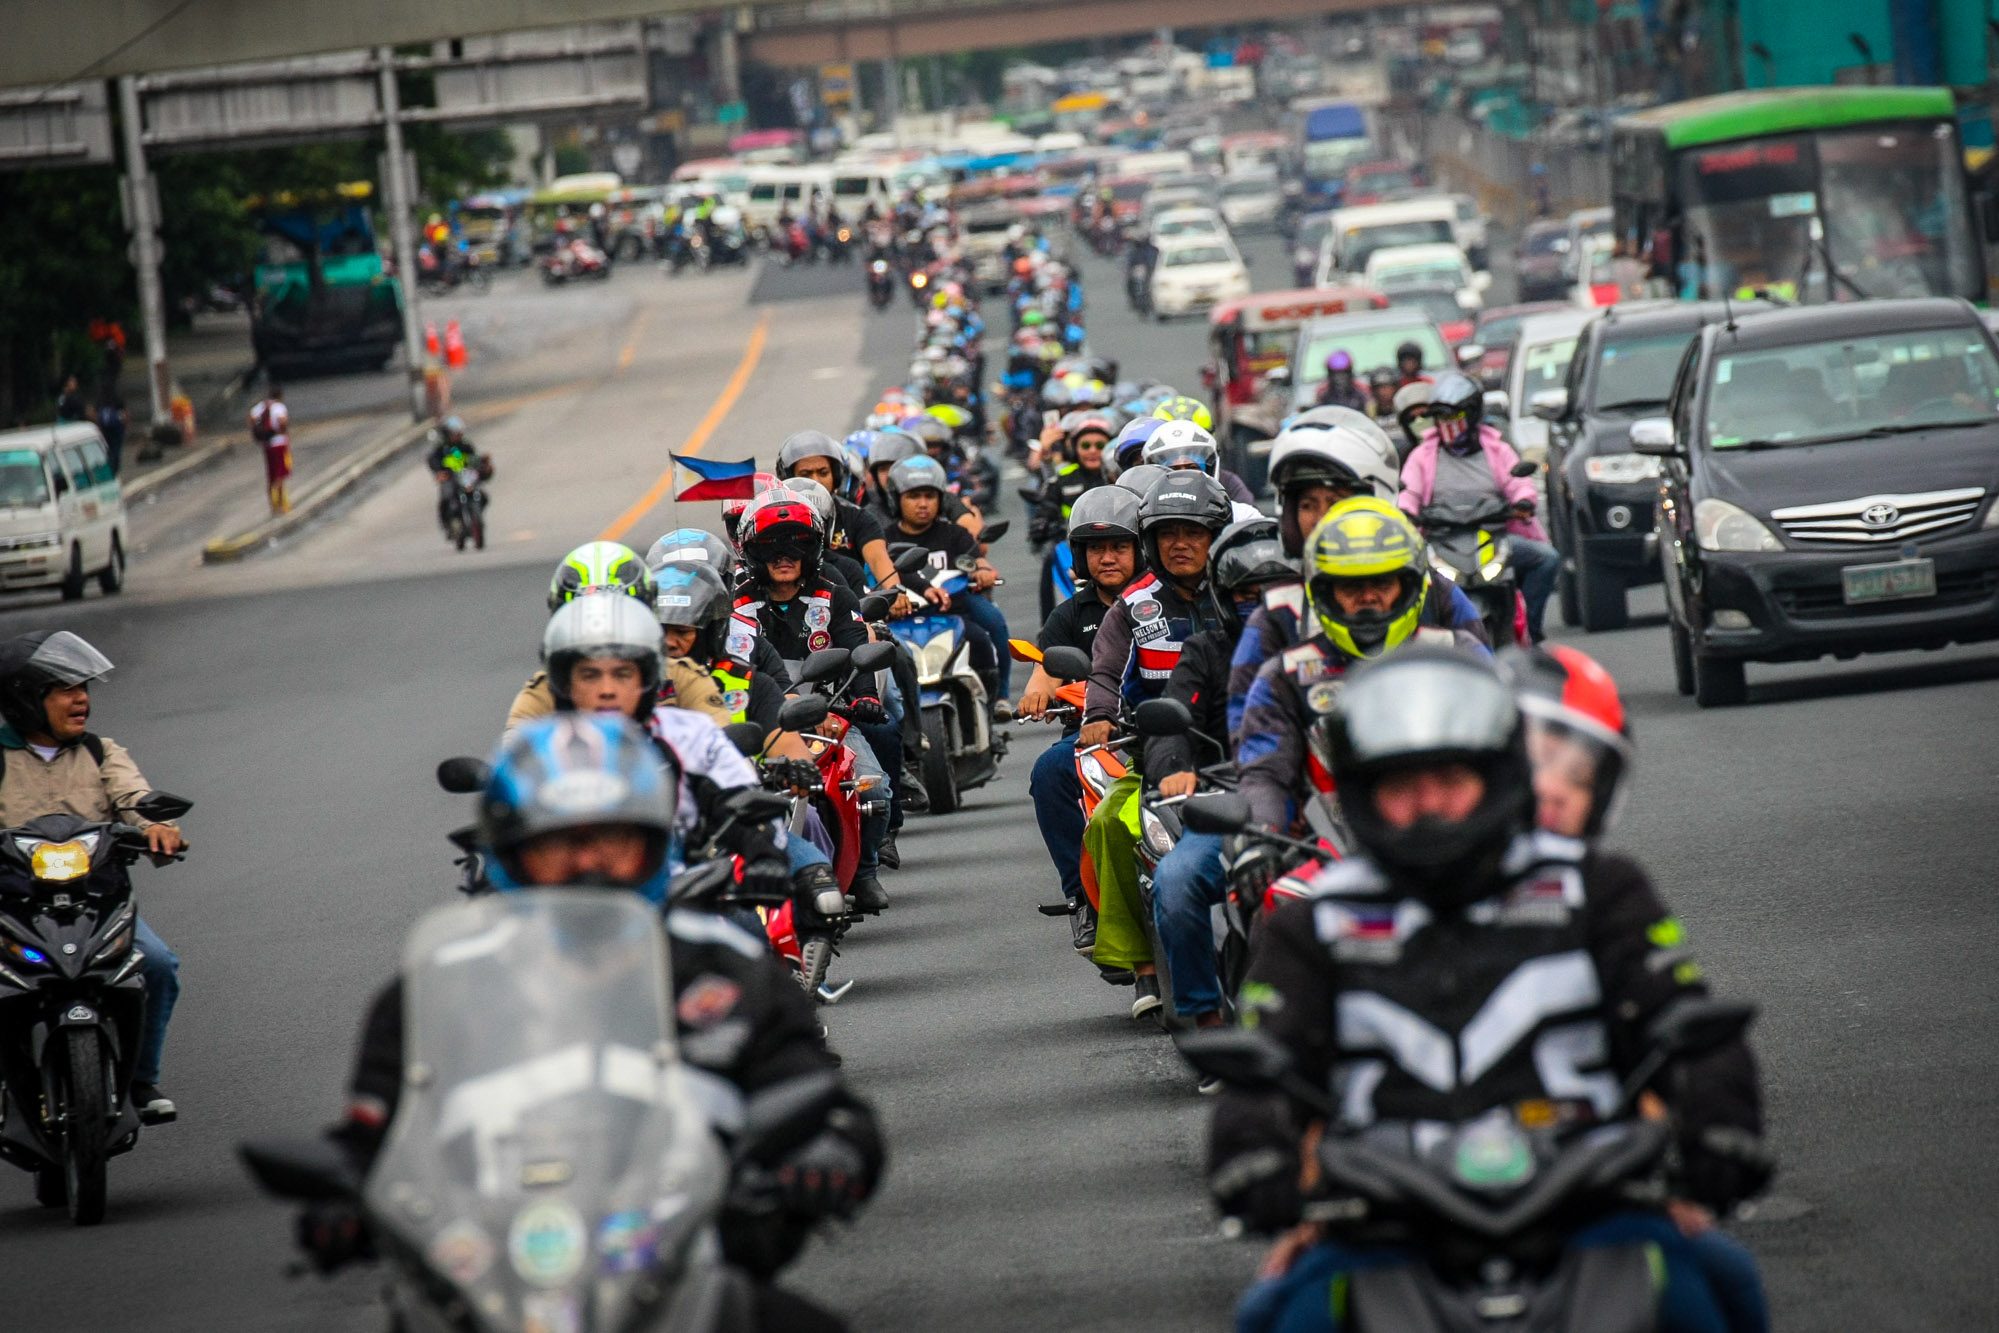 New law requires readable, color-coded number plates for motorcycles